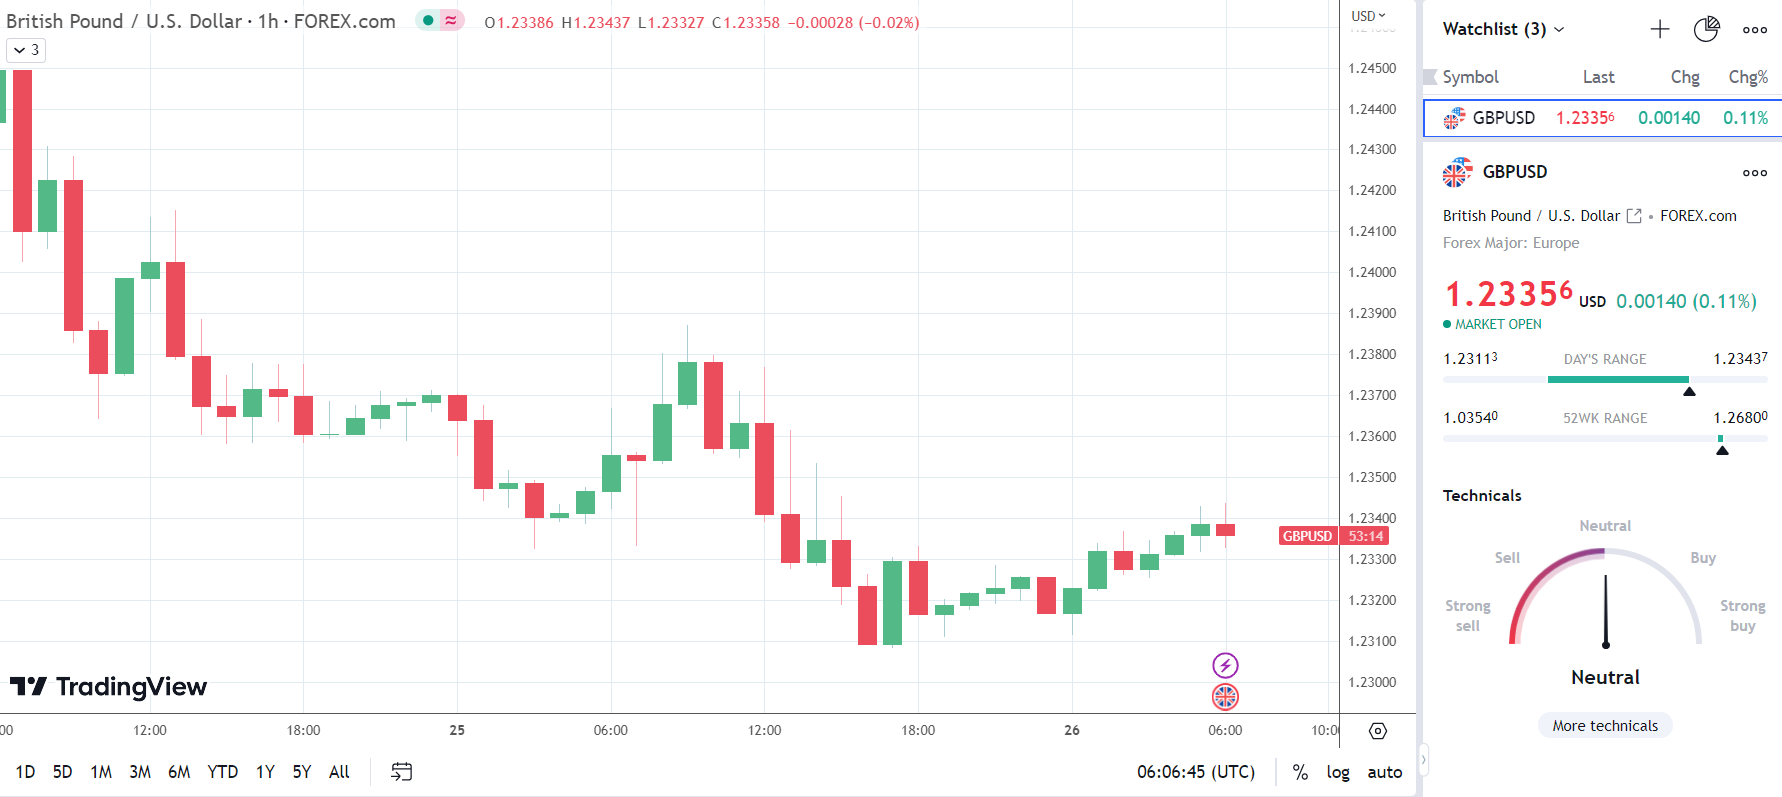 GBP/USD shows mixed reaction to UK retail sales numbers for April.